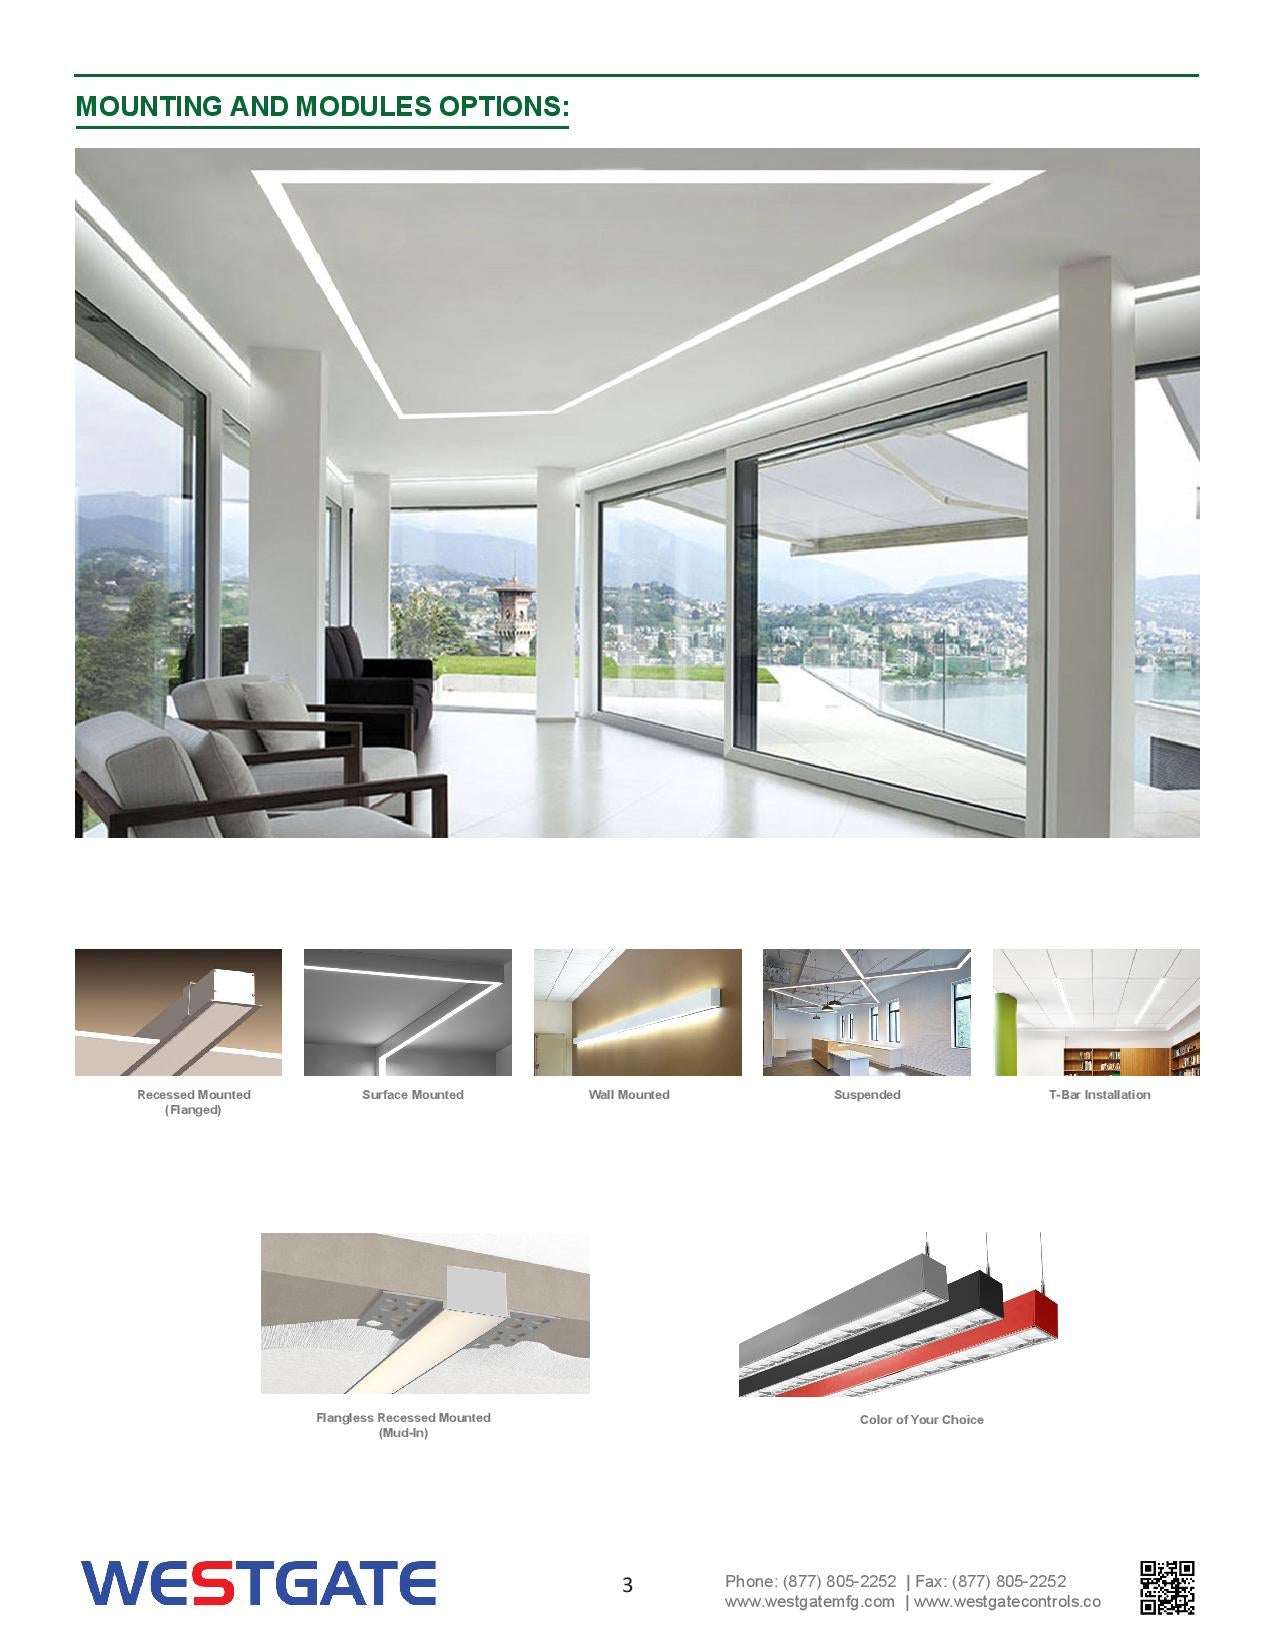 LED 2-3/4" Superior Architectural Seamless Linear Lights with Louver Lens